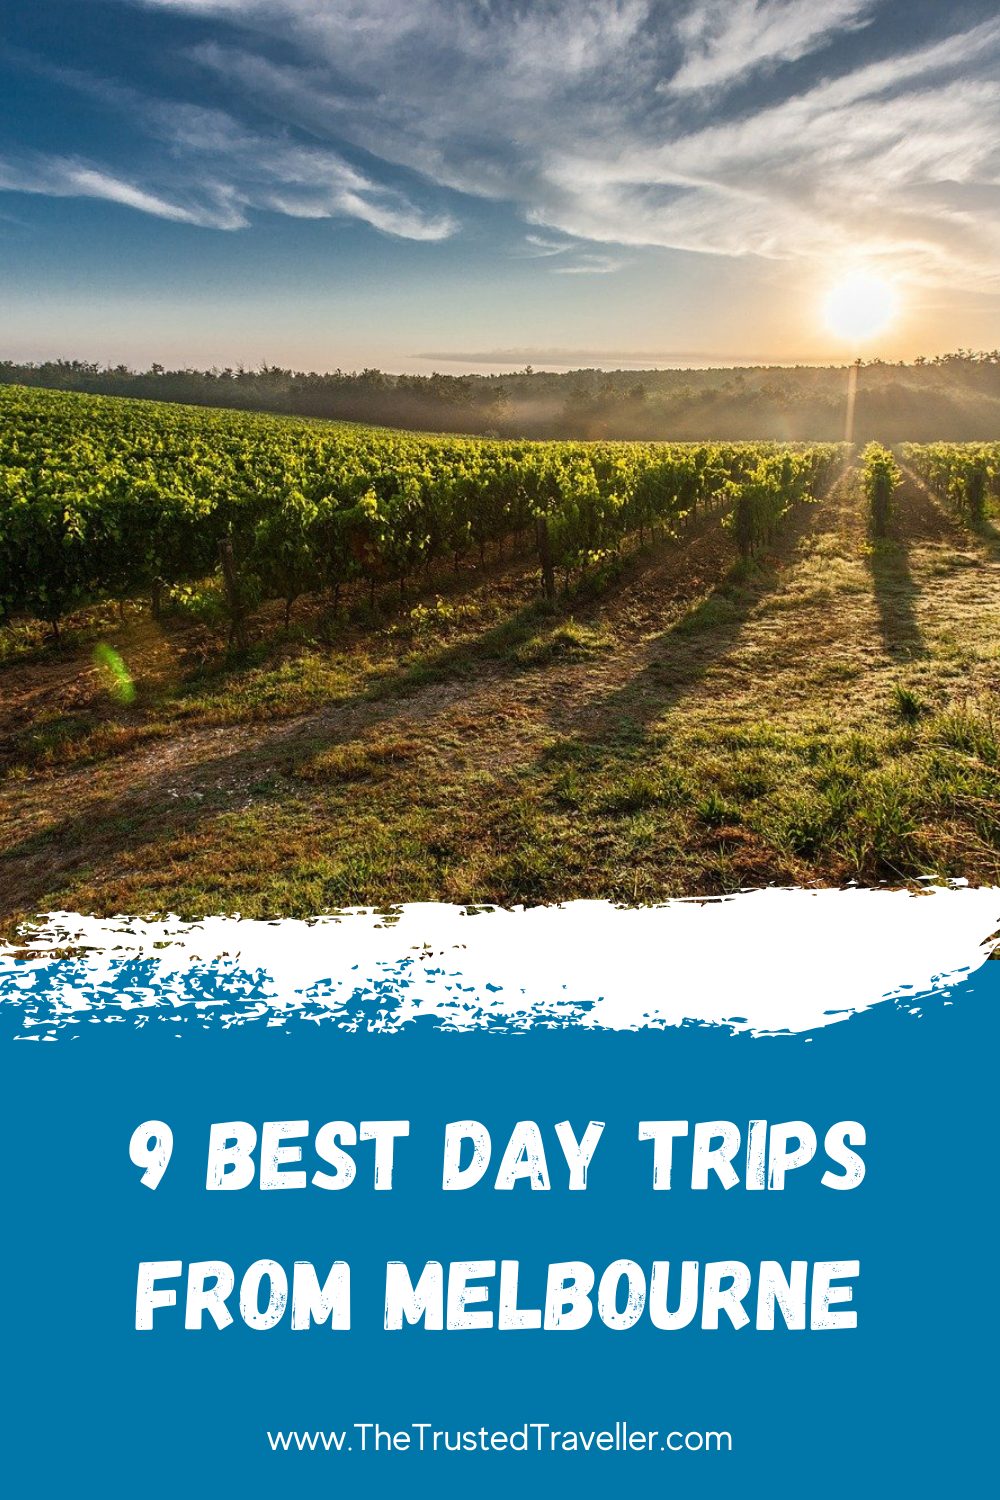 9 Best Day Trips from Melbourne - The Trusted Traveller